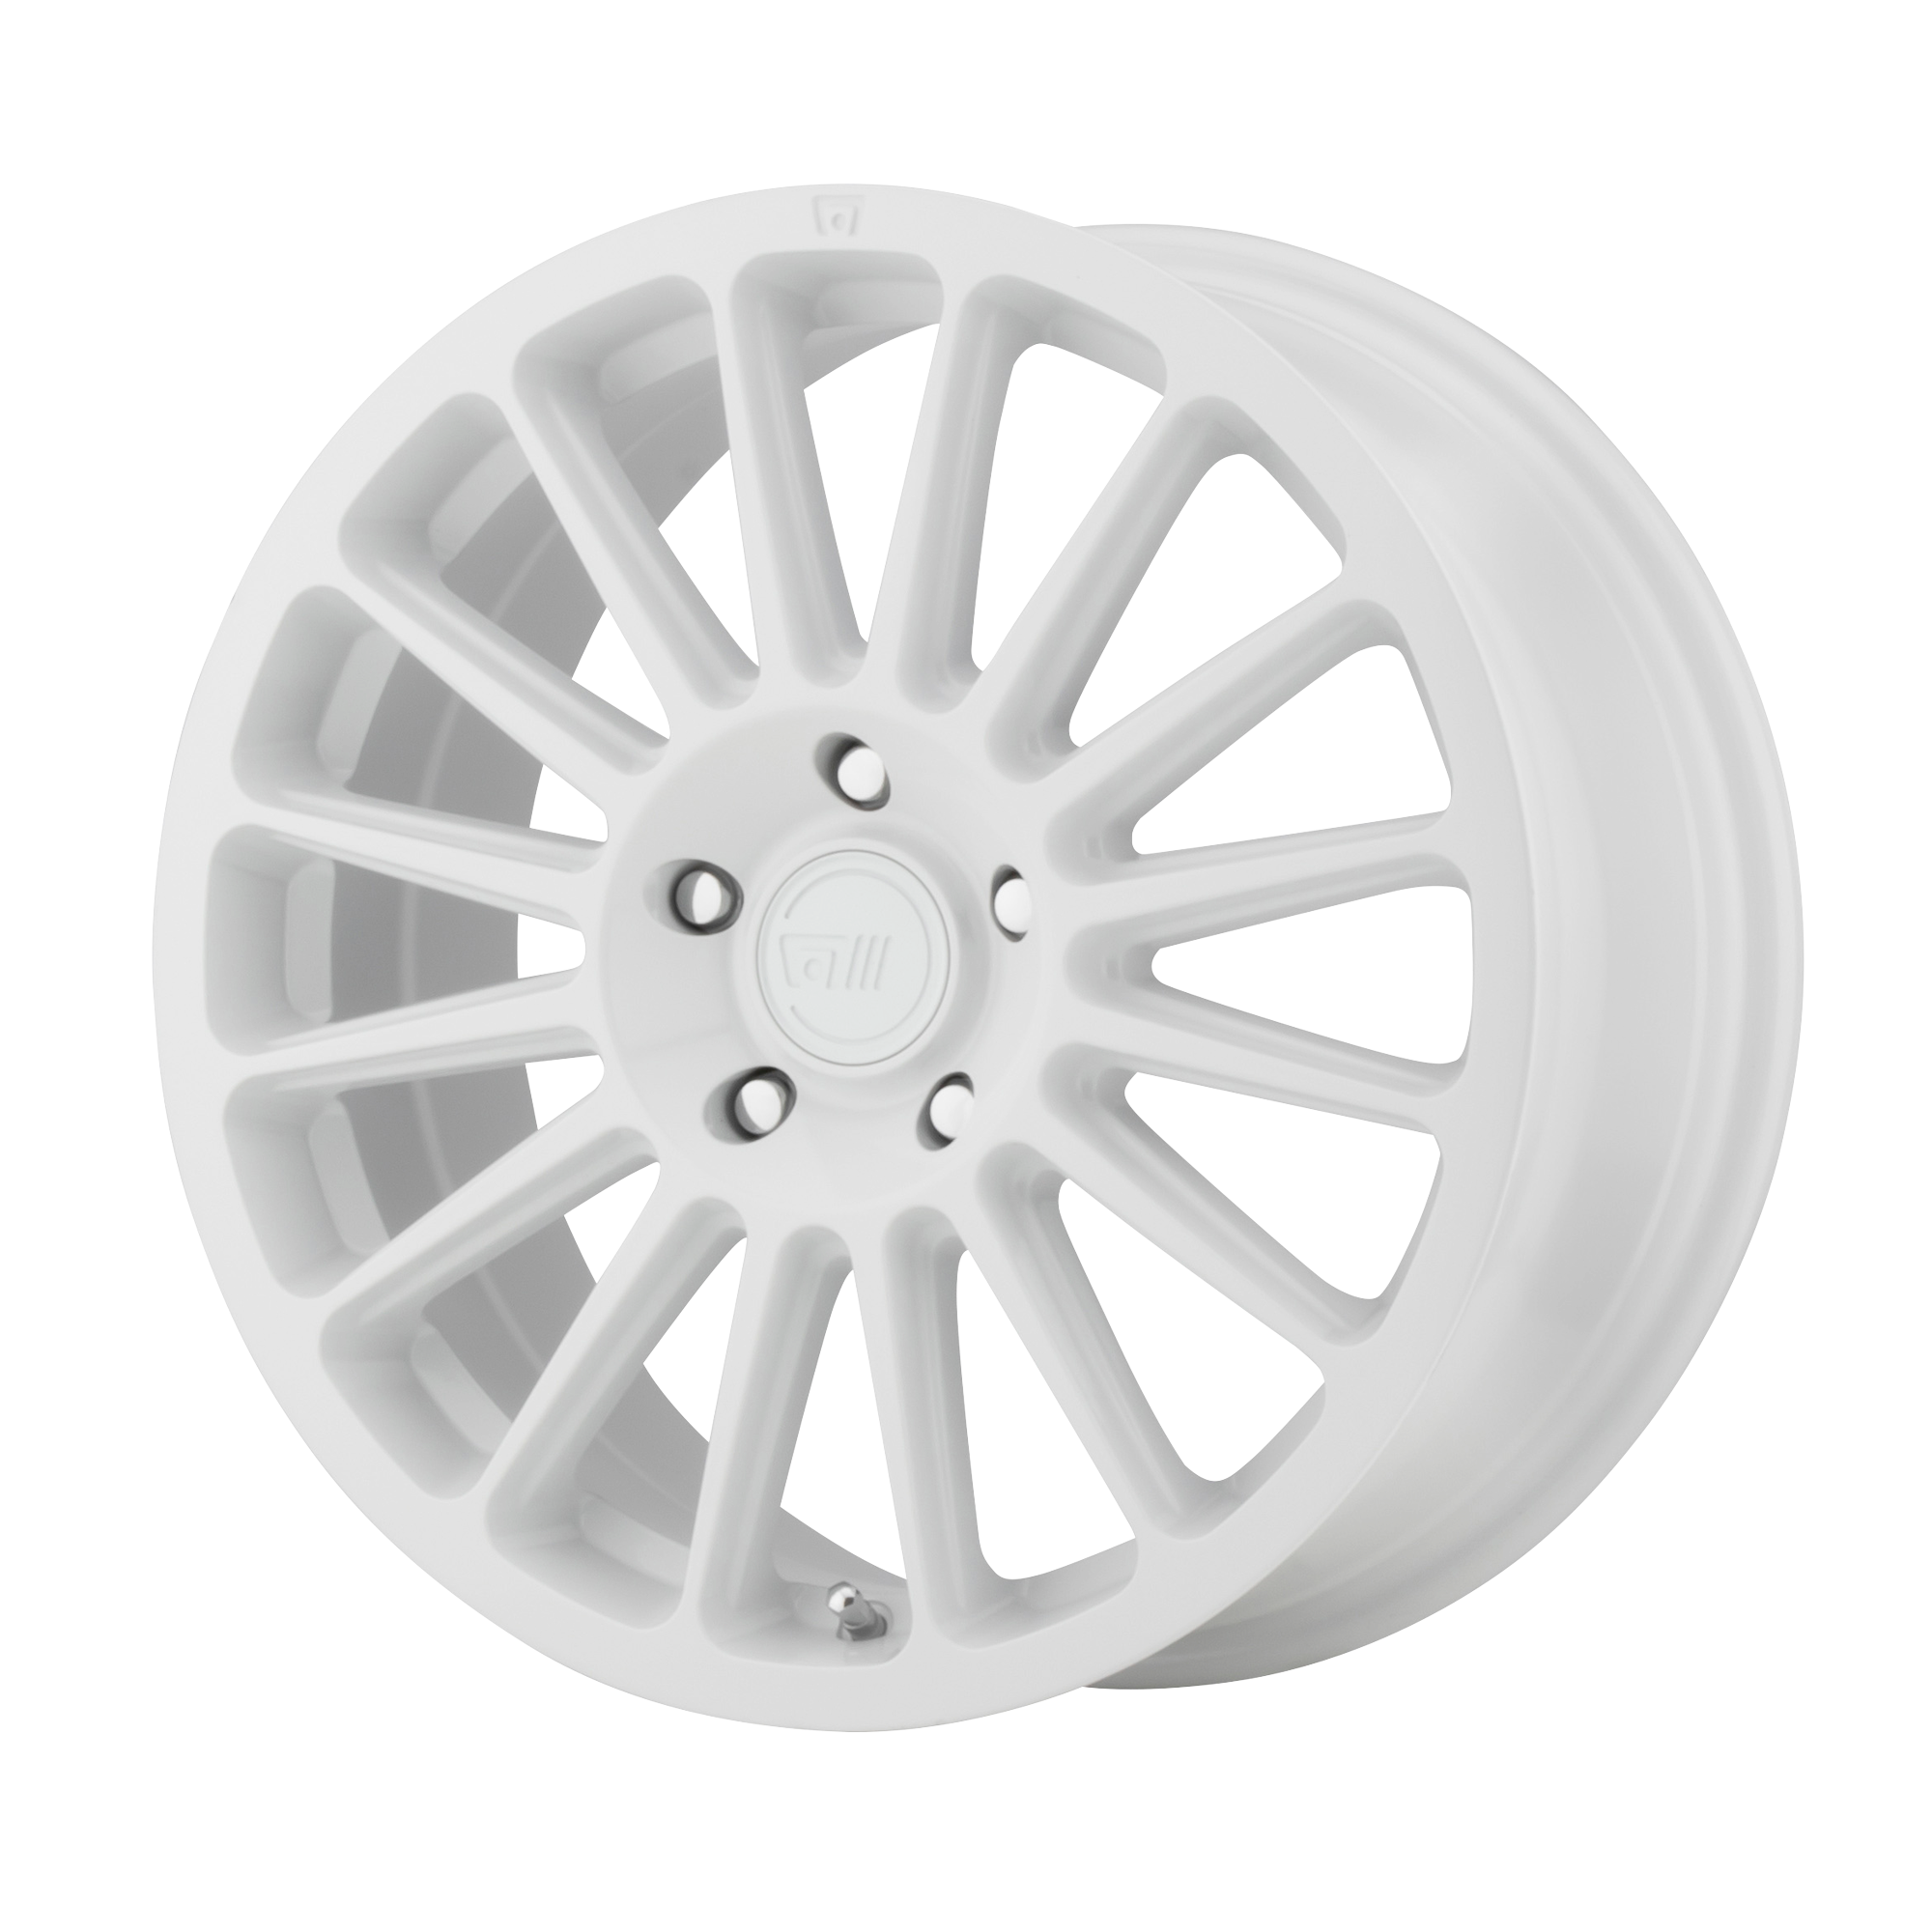 MR141 16x7.5 5x112.00 WHITE (40 mm) - Tires and Engine Performance